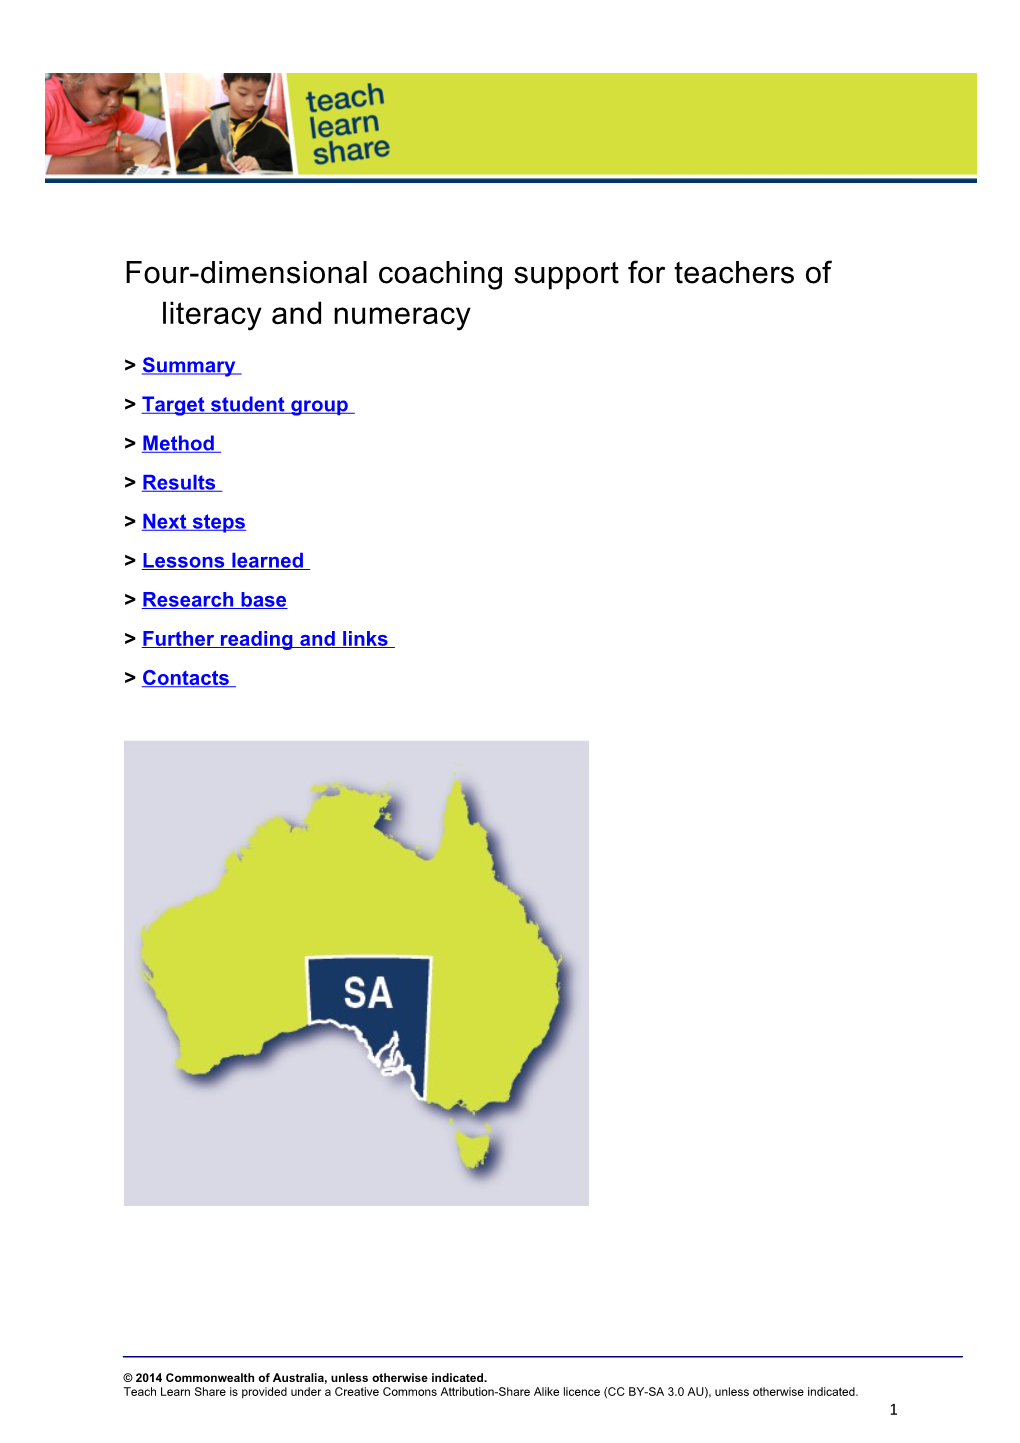 Four-Dimensional Coaching Support for Teachers of Literacy and Numeracy